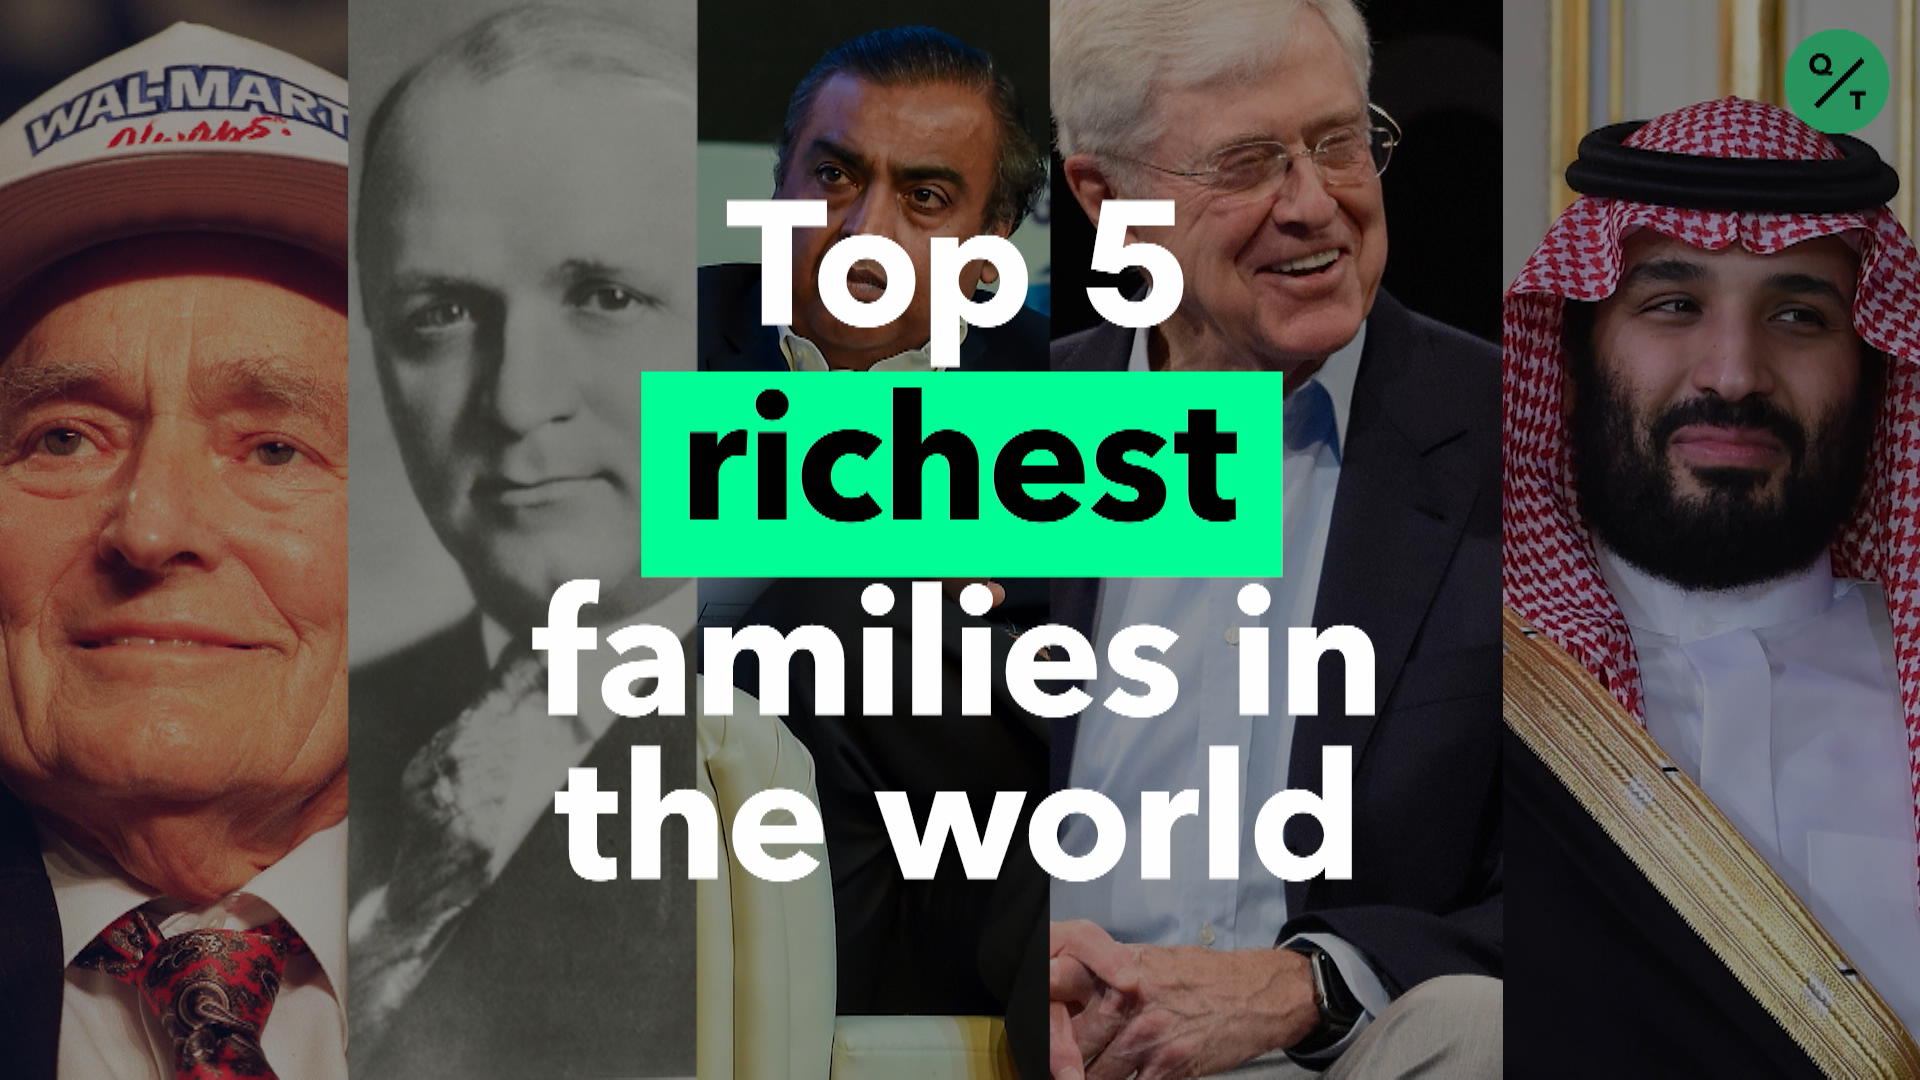 Watch Top 5 Richest Families in the World Bloomberg